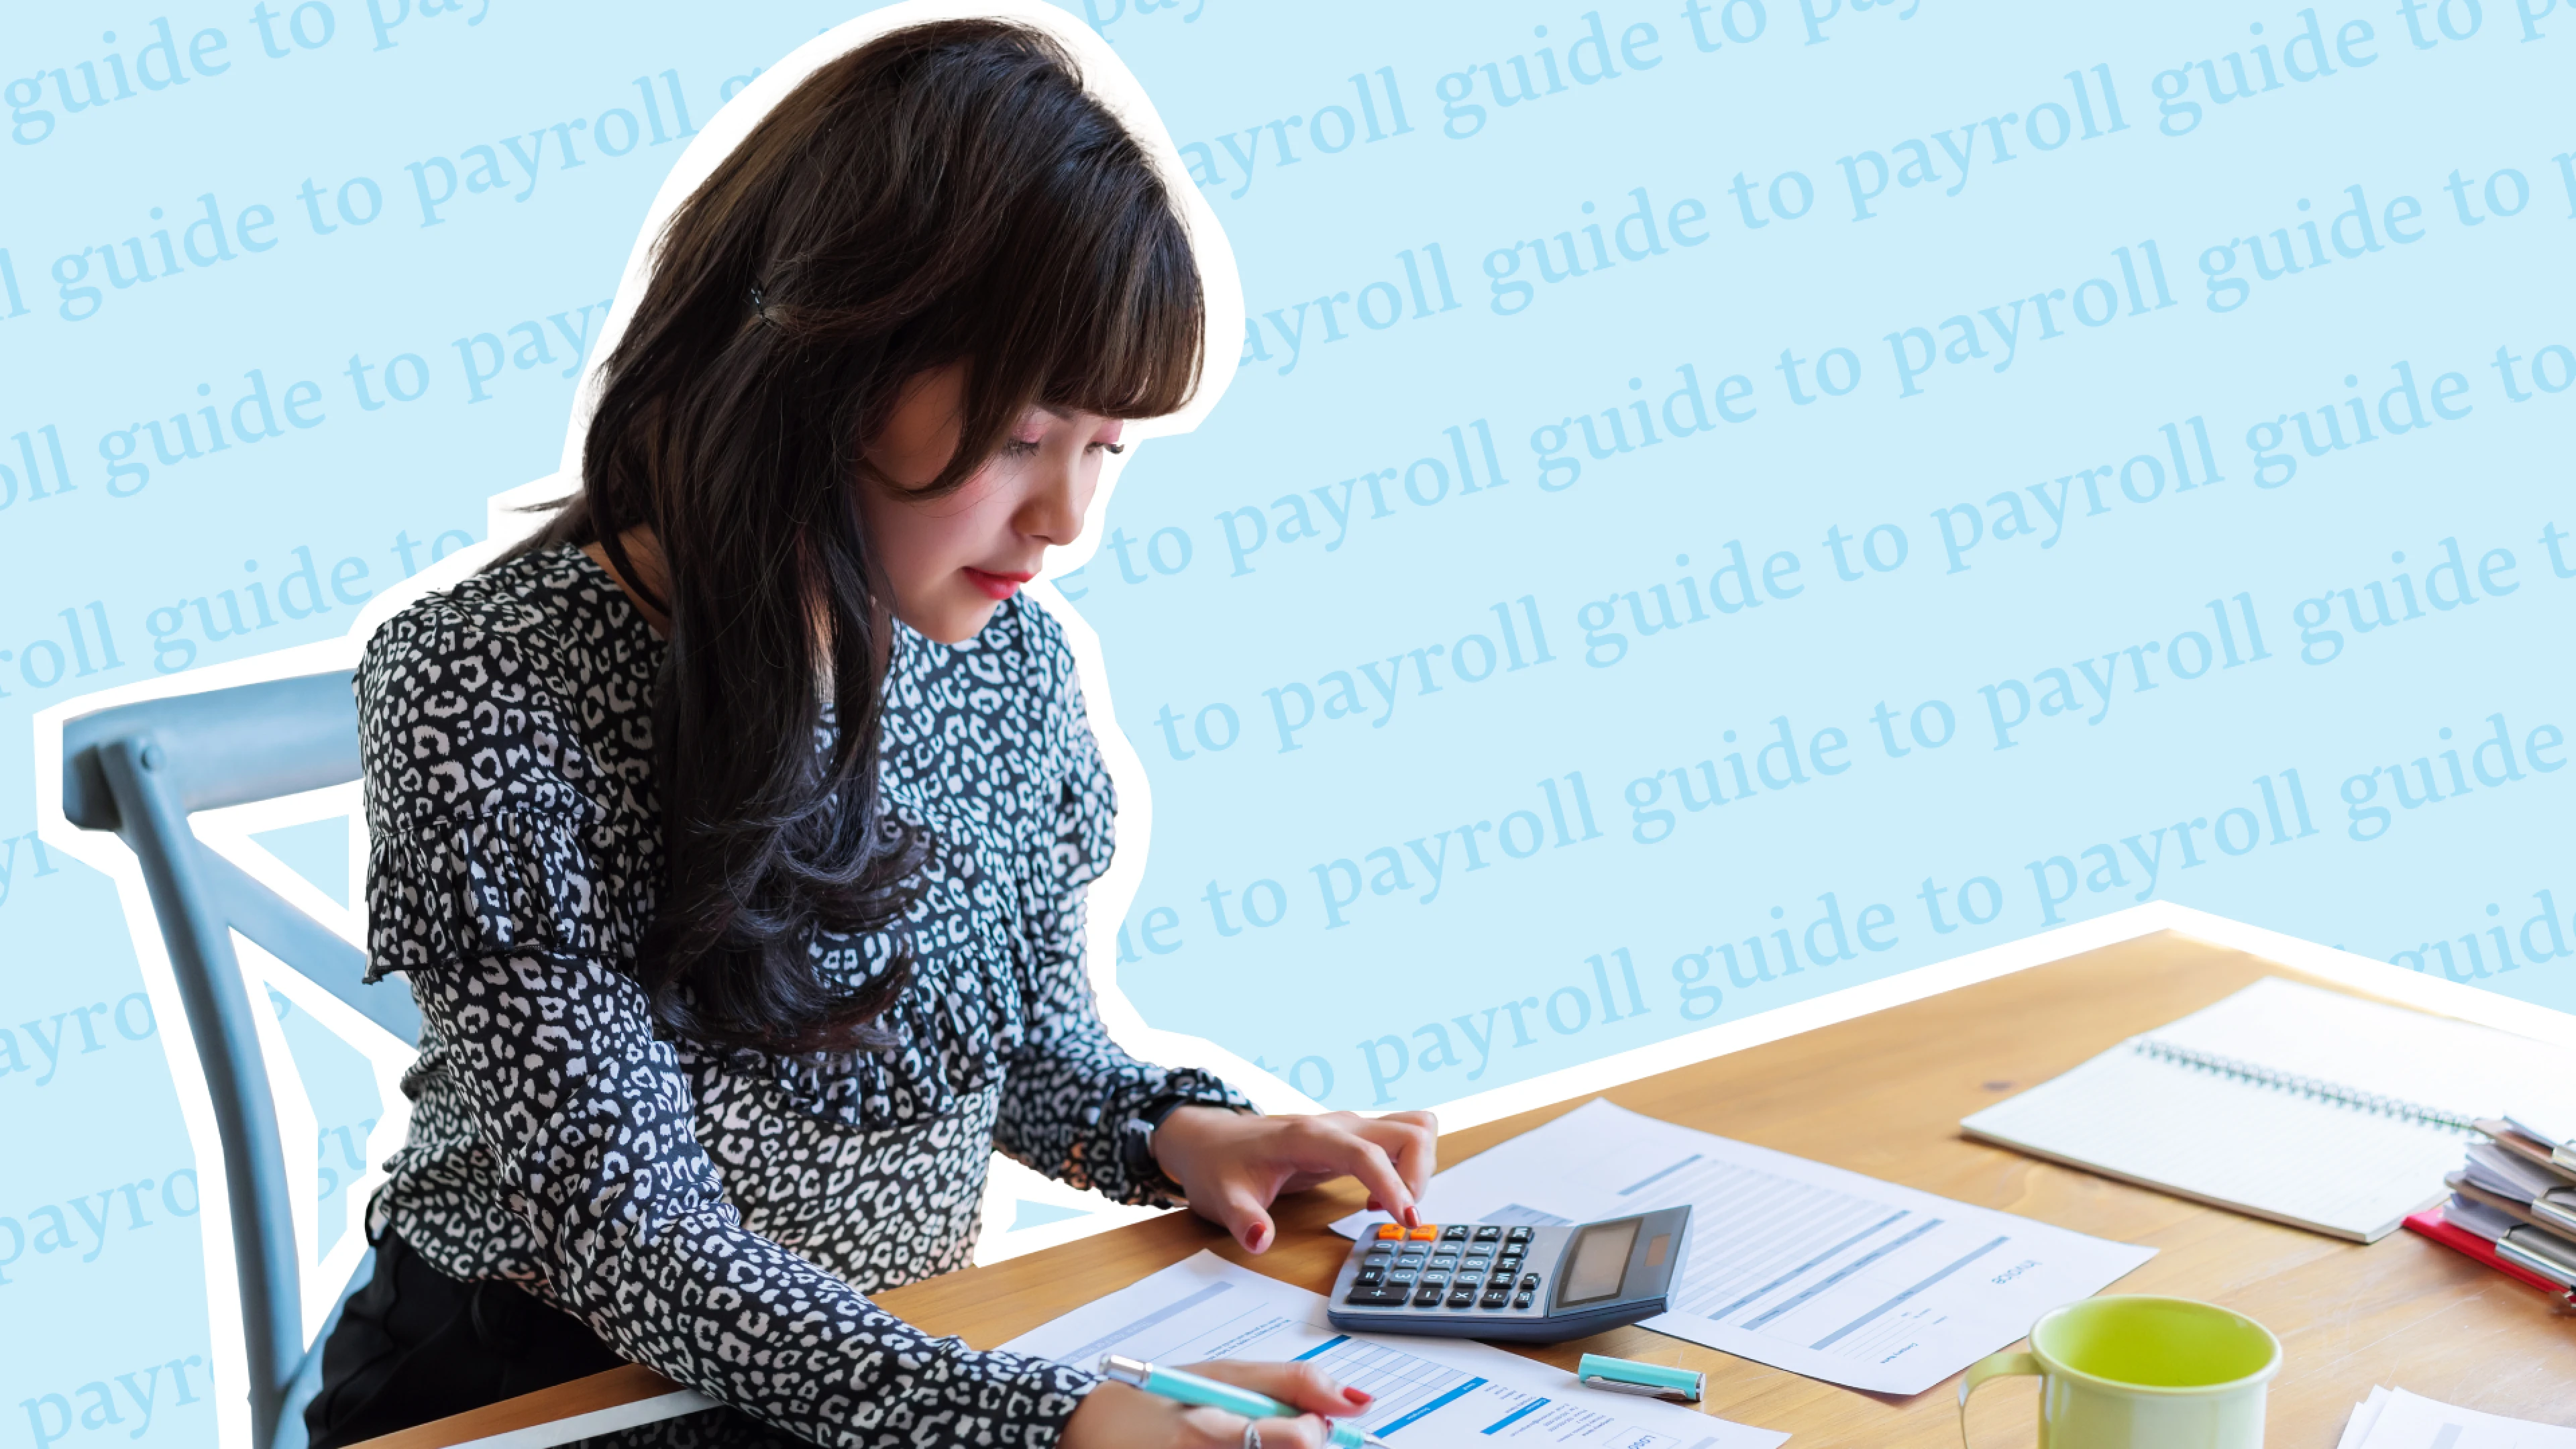 The Accountant's Guide to Payroll